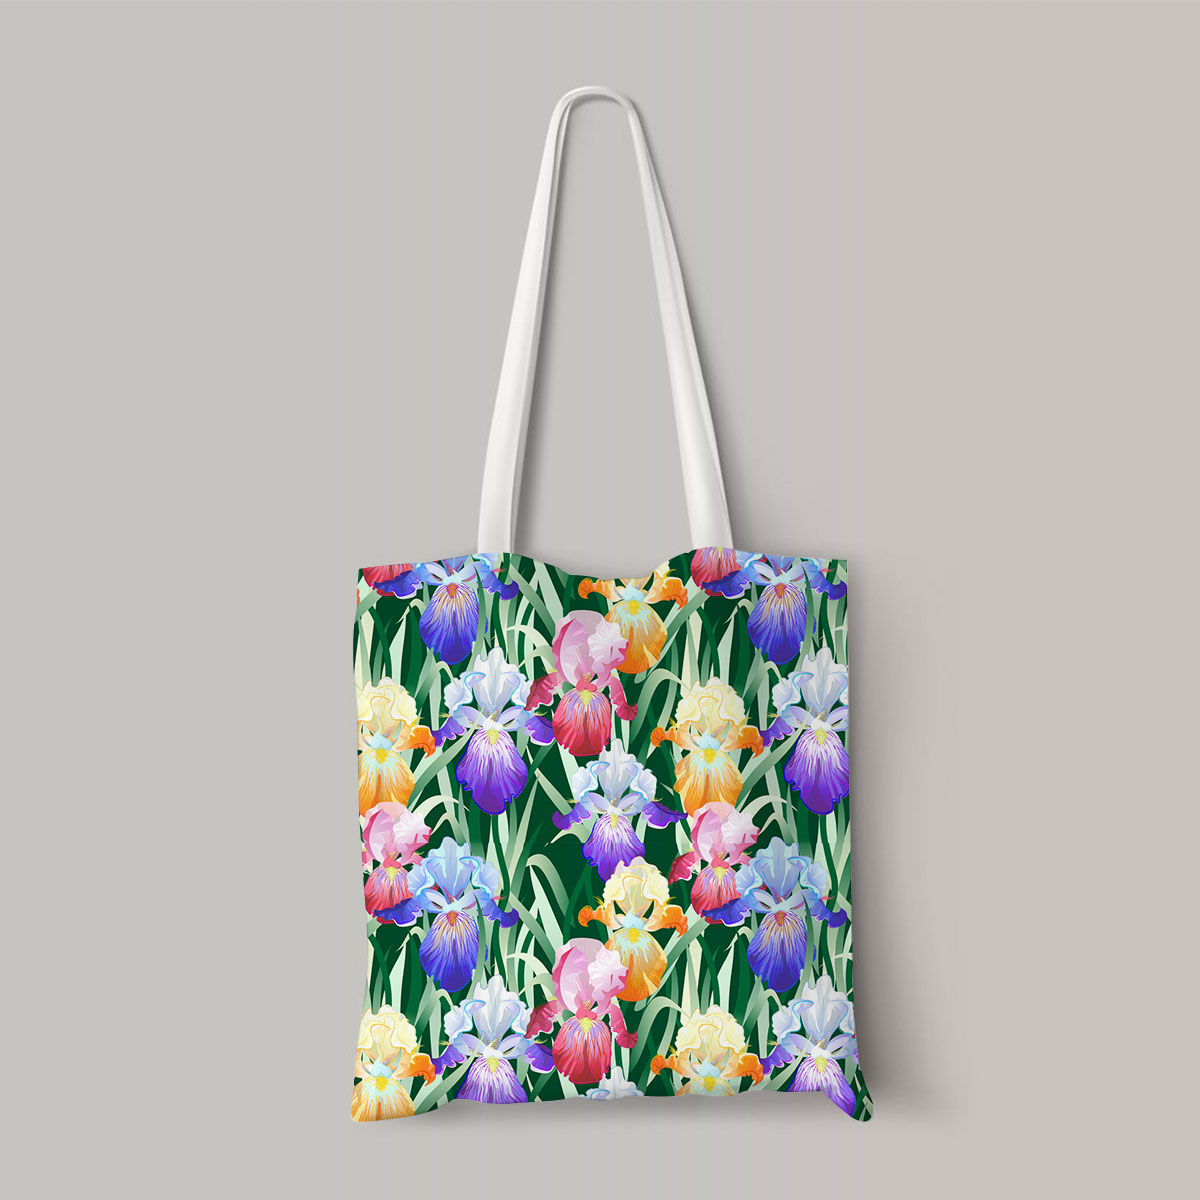 Colorful Iris Flowers And Green Leaves Totebag